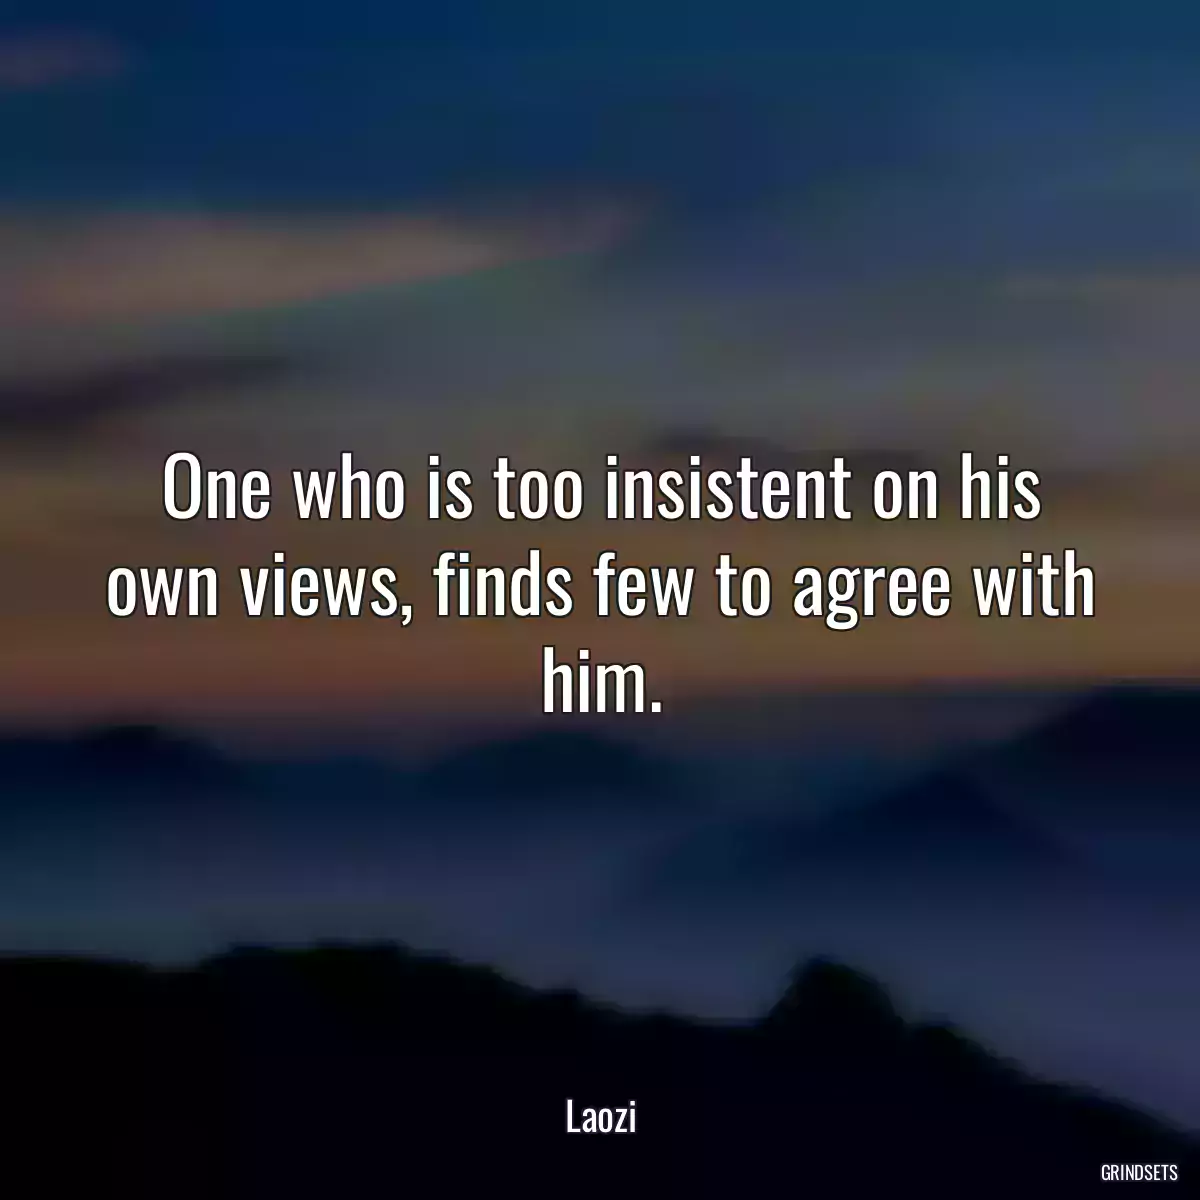 One who is too insistent on his own views, finds few to agree with him.